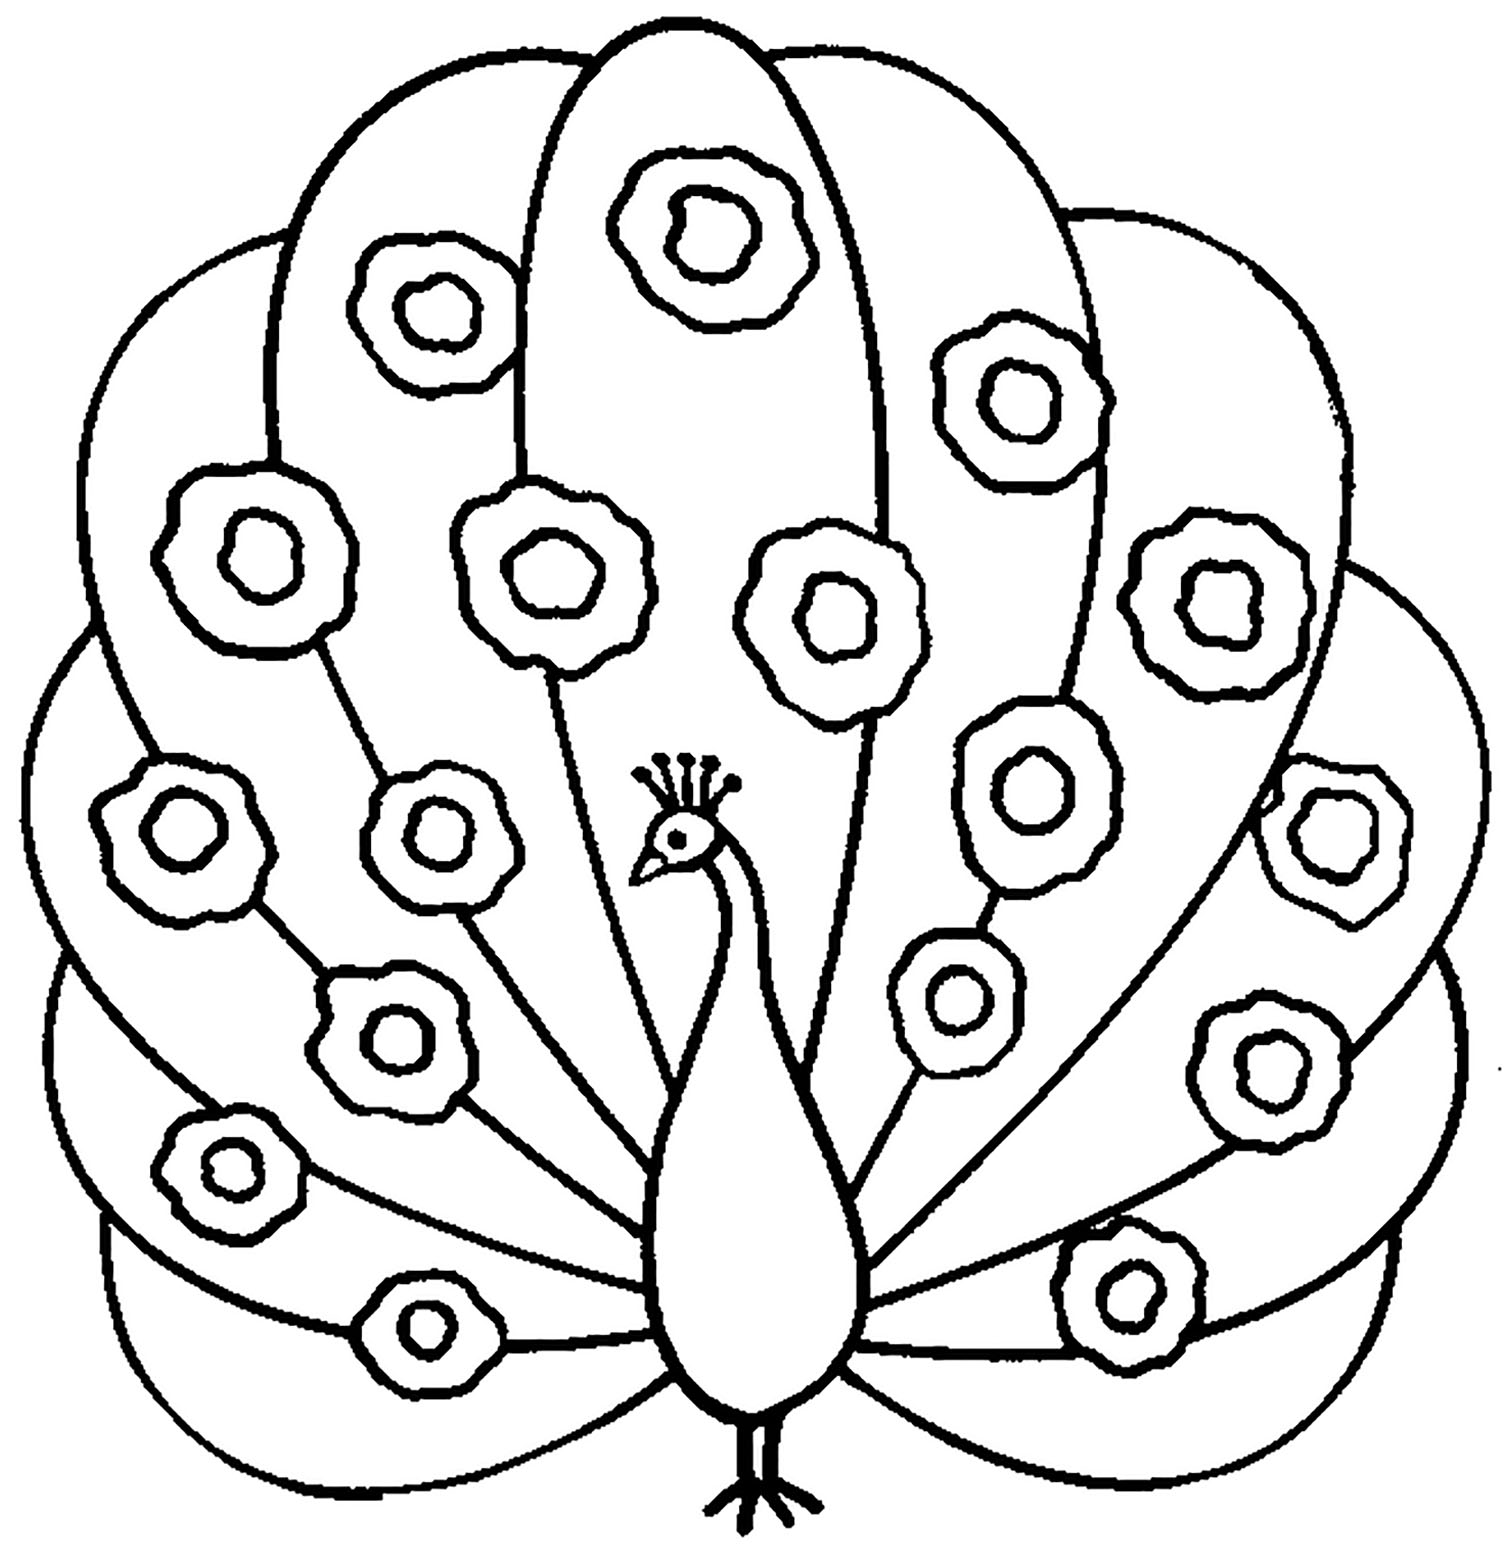 Download Peacocks to download for free - Peacocks Kids Coloring Pages